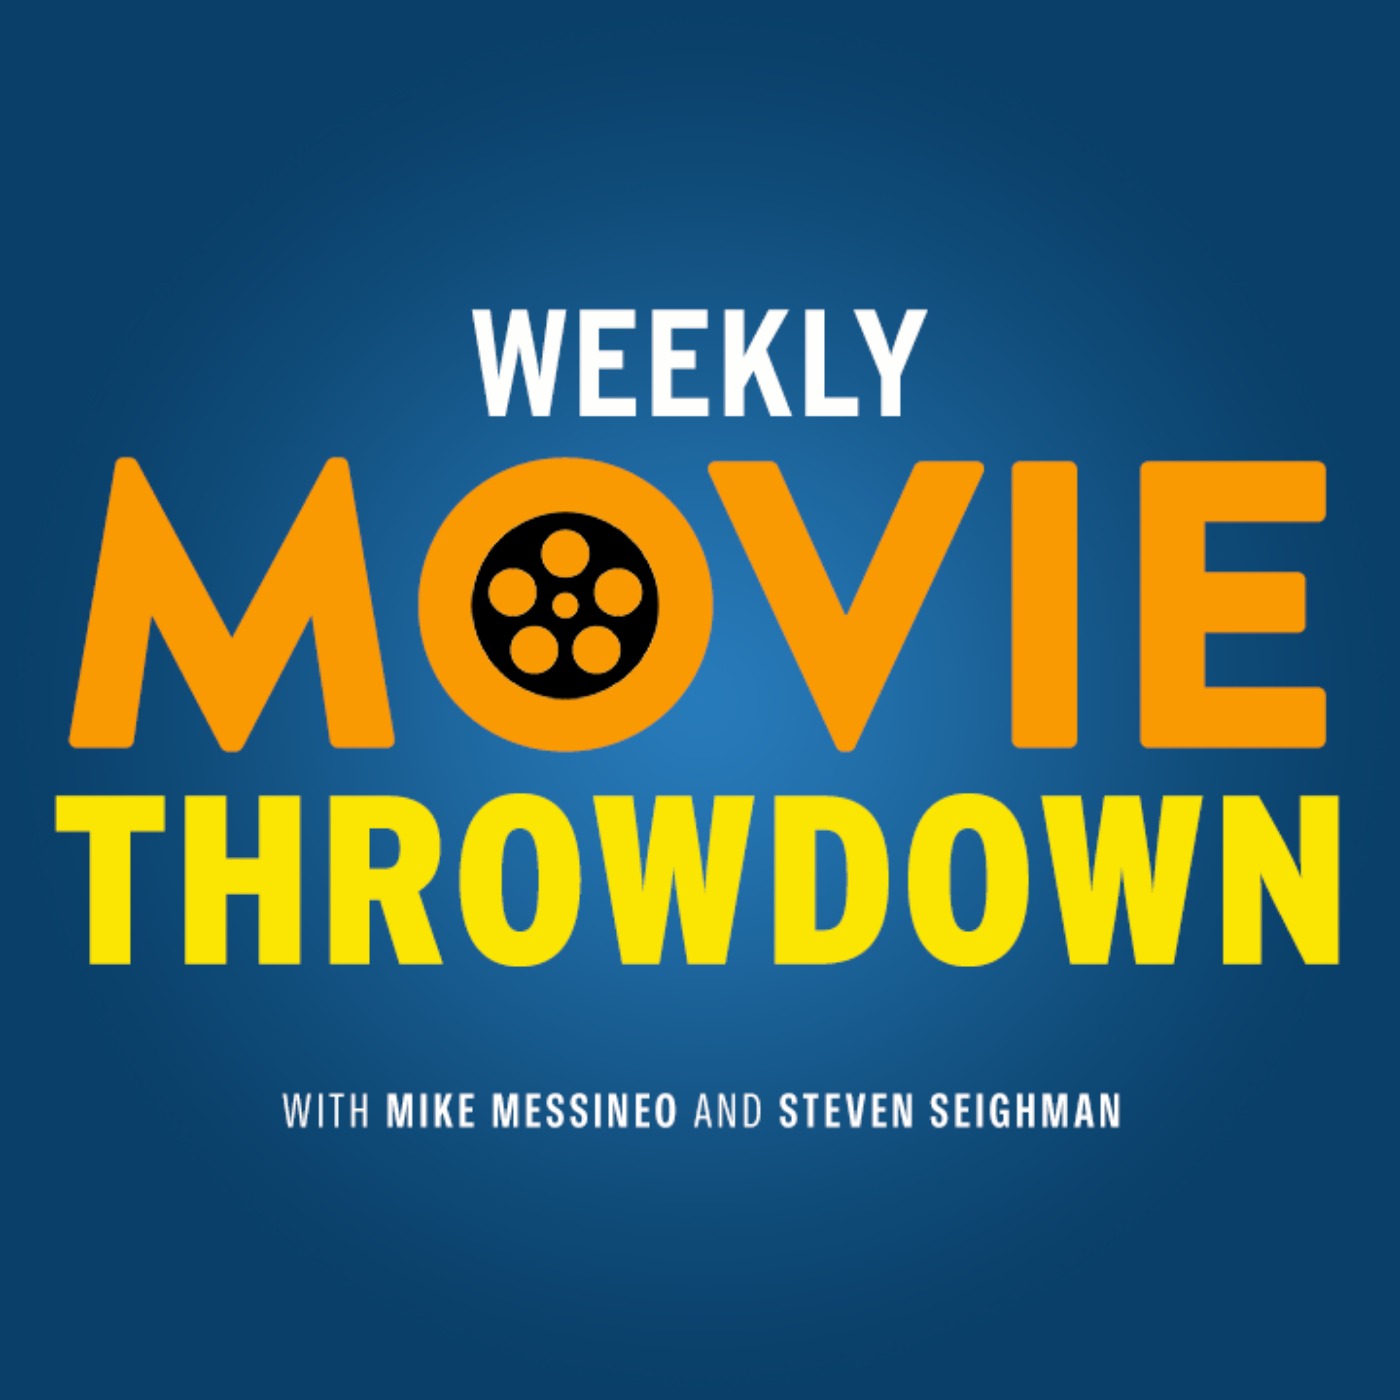 The Weekly Movie Throwdown Episode 004: Statham Double Feature! Lock, Stock and Two Smoking Barrels and Snatch